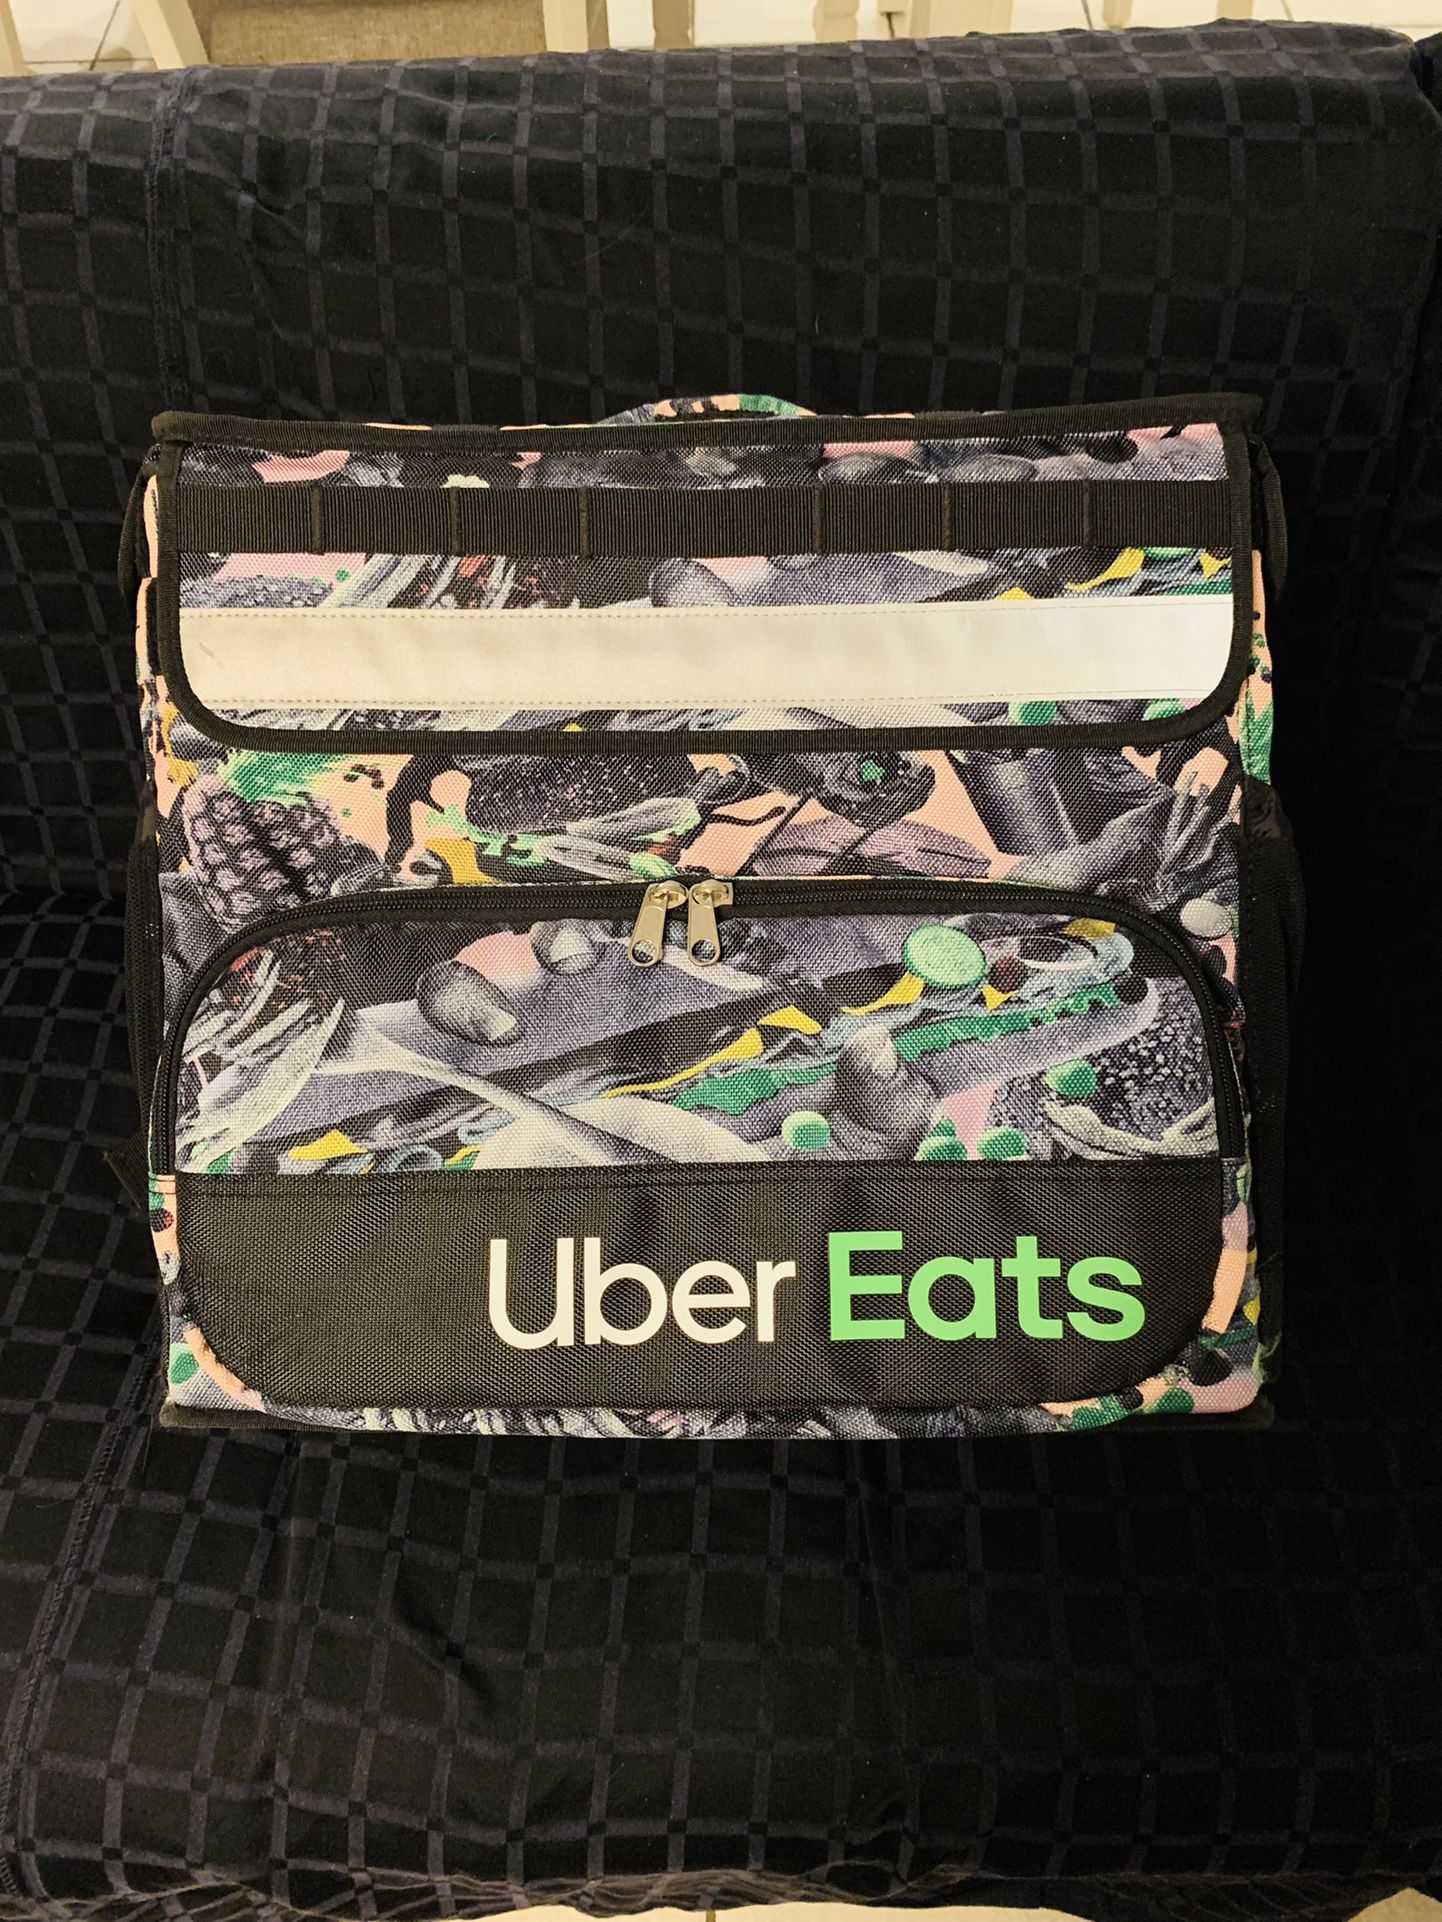 Uber Eats Official Insulated Bag!!! (BRAND NEW)